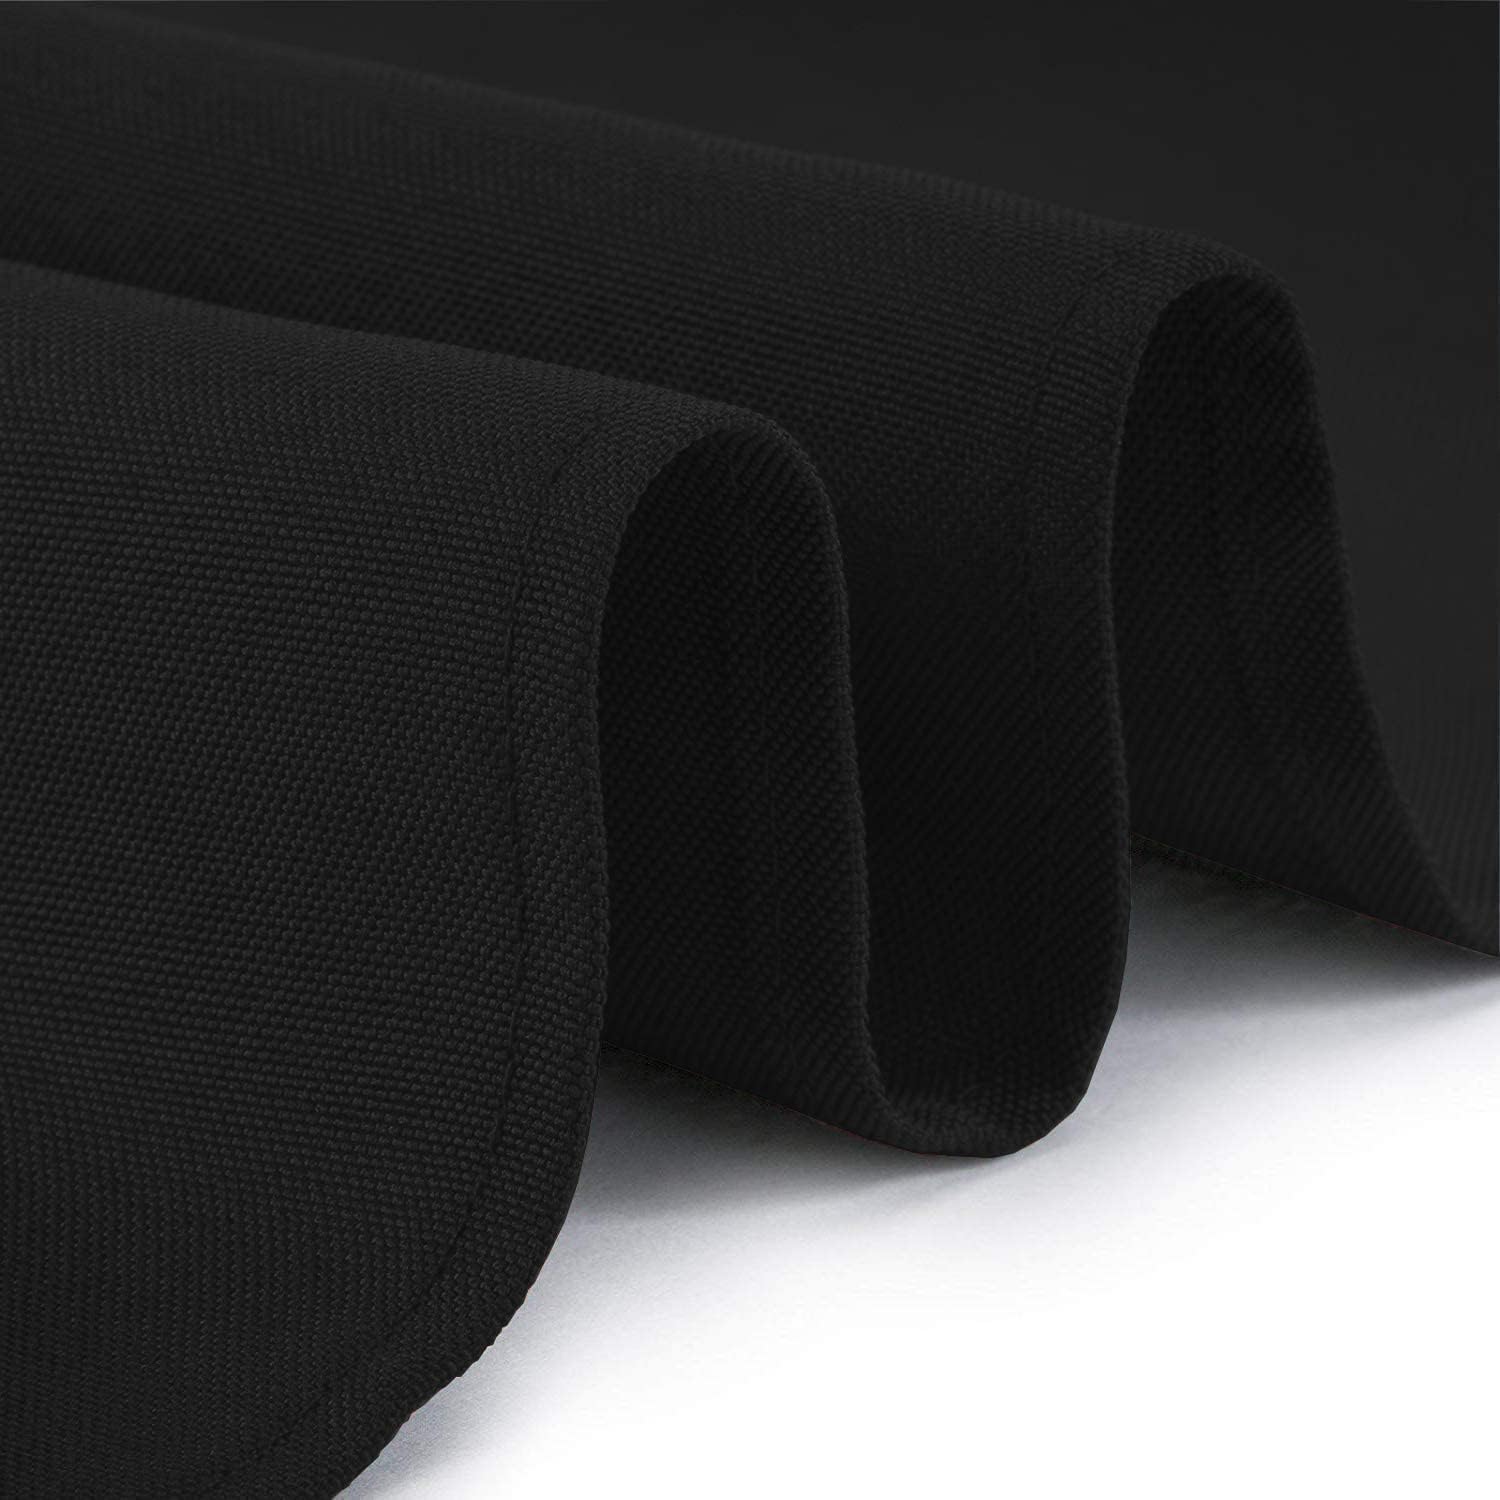 [2 Pack] 60" Round Premium Tablecloths for Wedding | Banquet | Restaurant | Washable Fabric Table Cloth  - Very Good